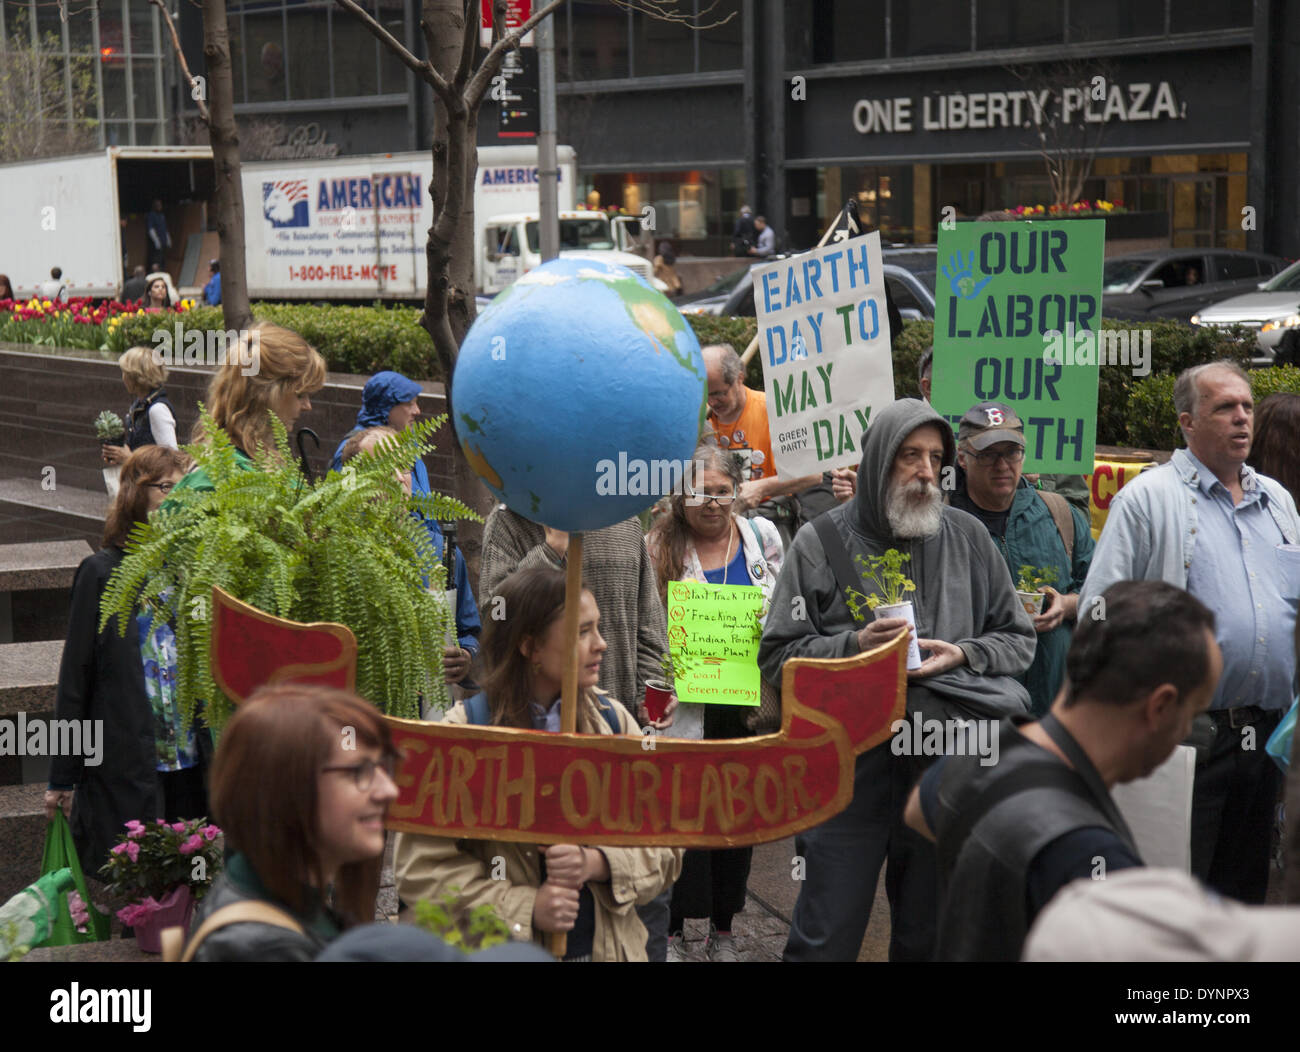 New York, NY, USA . 22nd Apr, 2014. Environmental activists rally on Earth Day at Zuccotti Park, then march to Wall Street calling for system change not climate change. The Occupy movement is still around in NYC it seems. Credit:  David Grossman/Alamy Live News Stock Photo